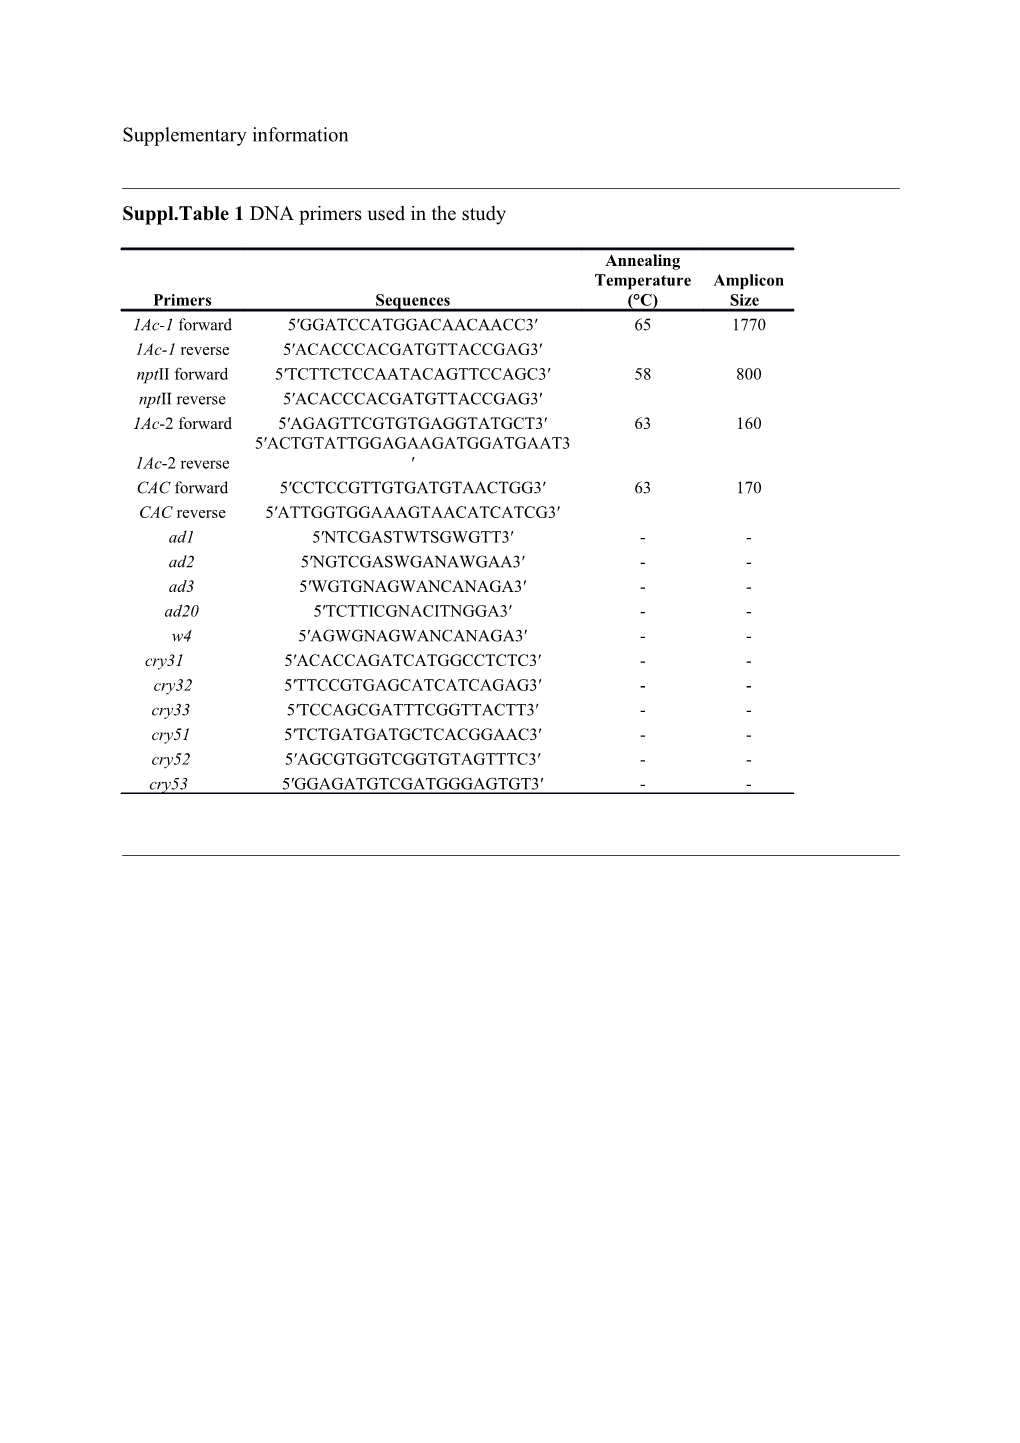 Suppl.Table 1 DNA Primers Used in the Study